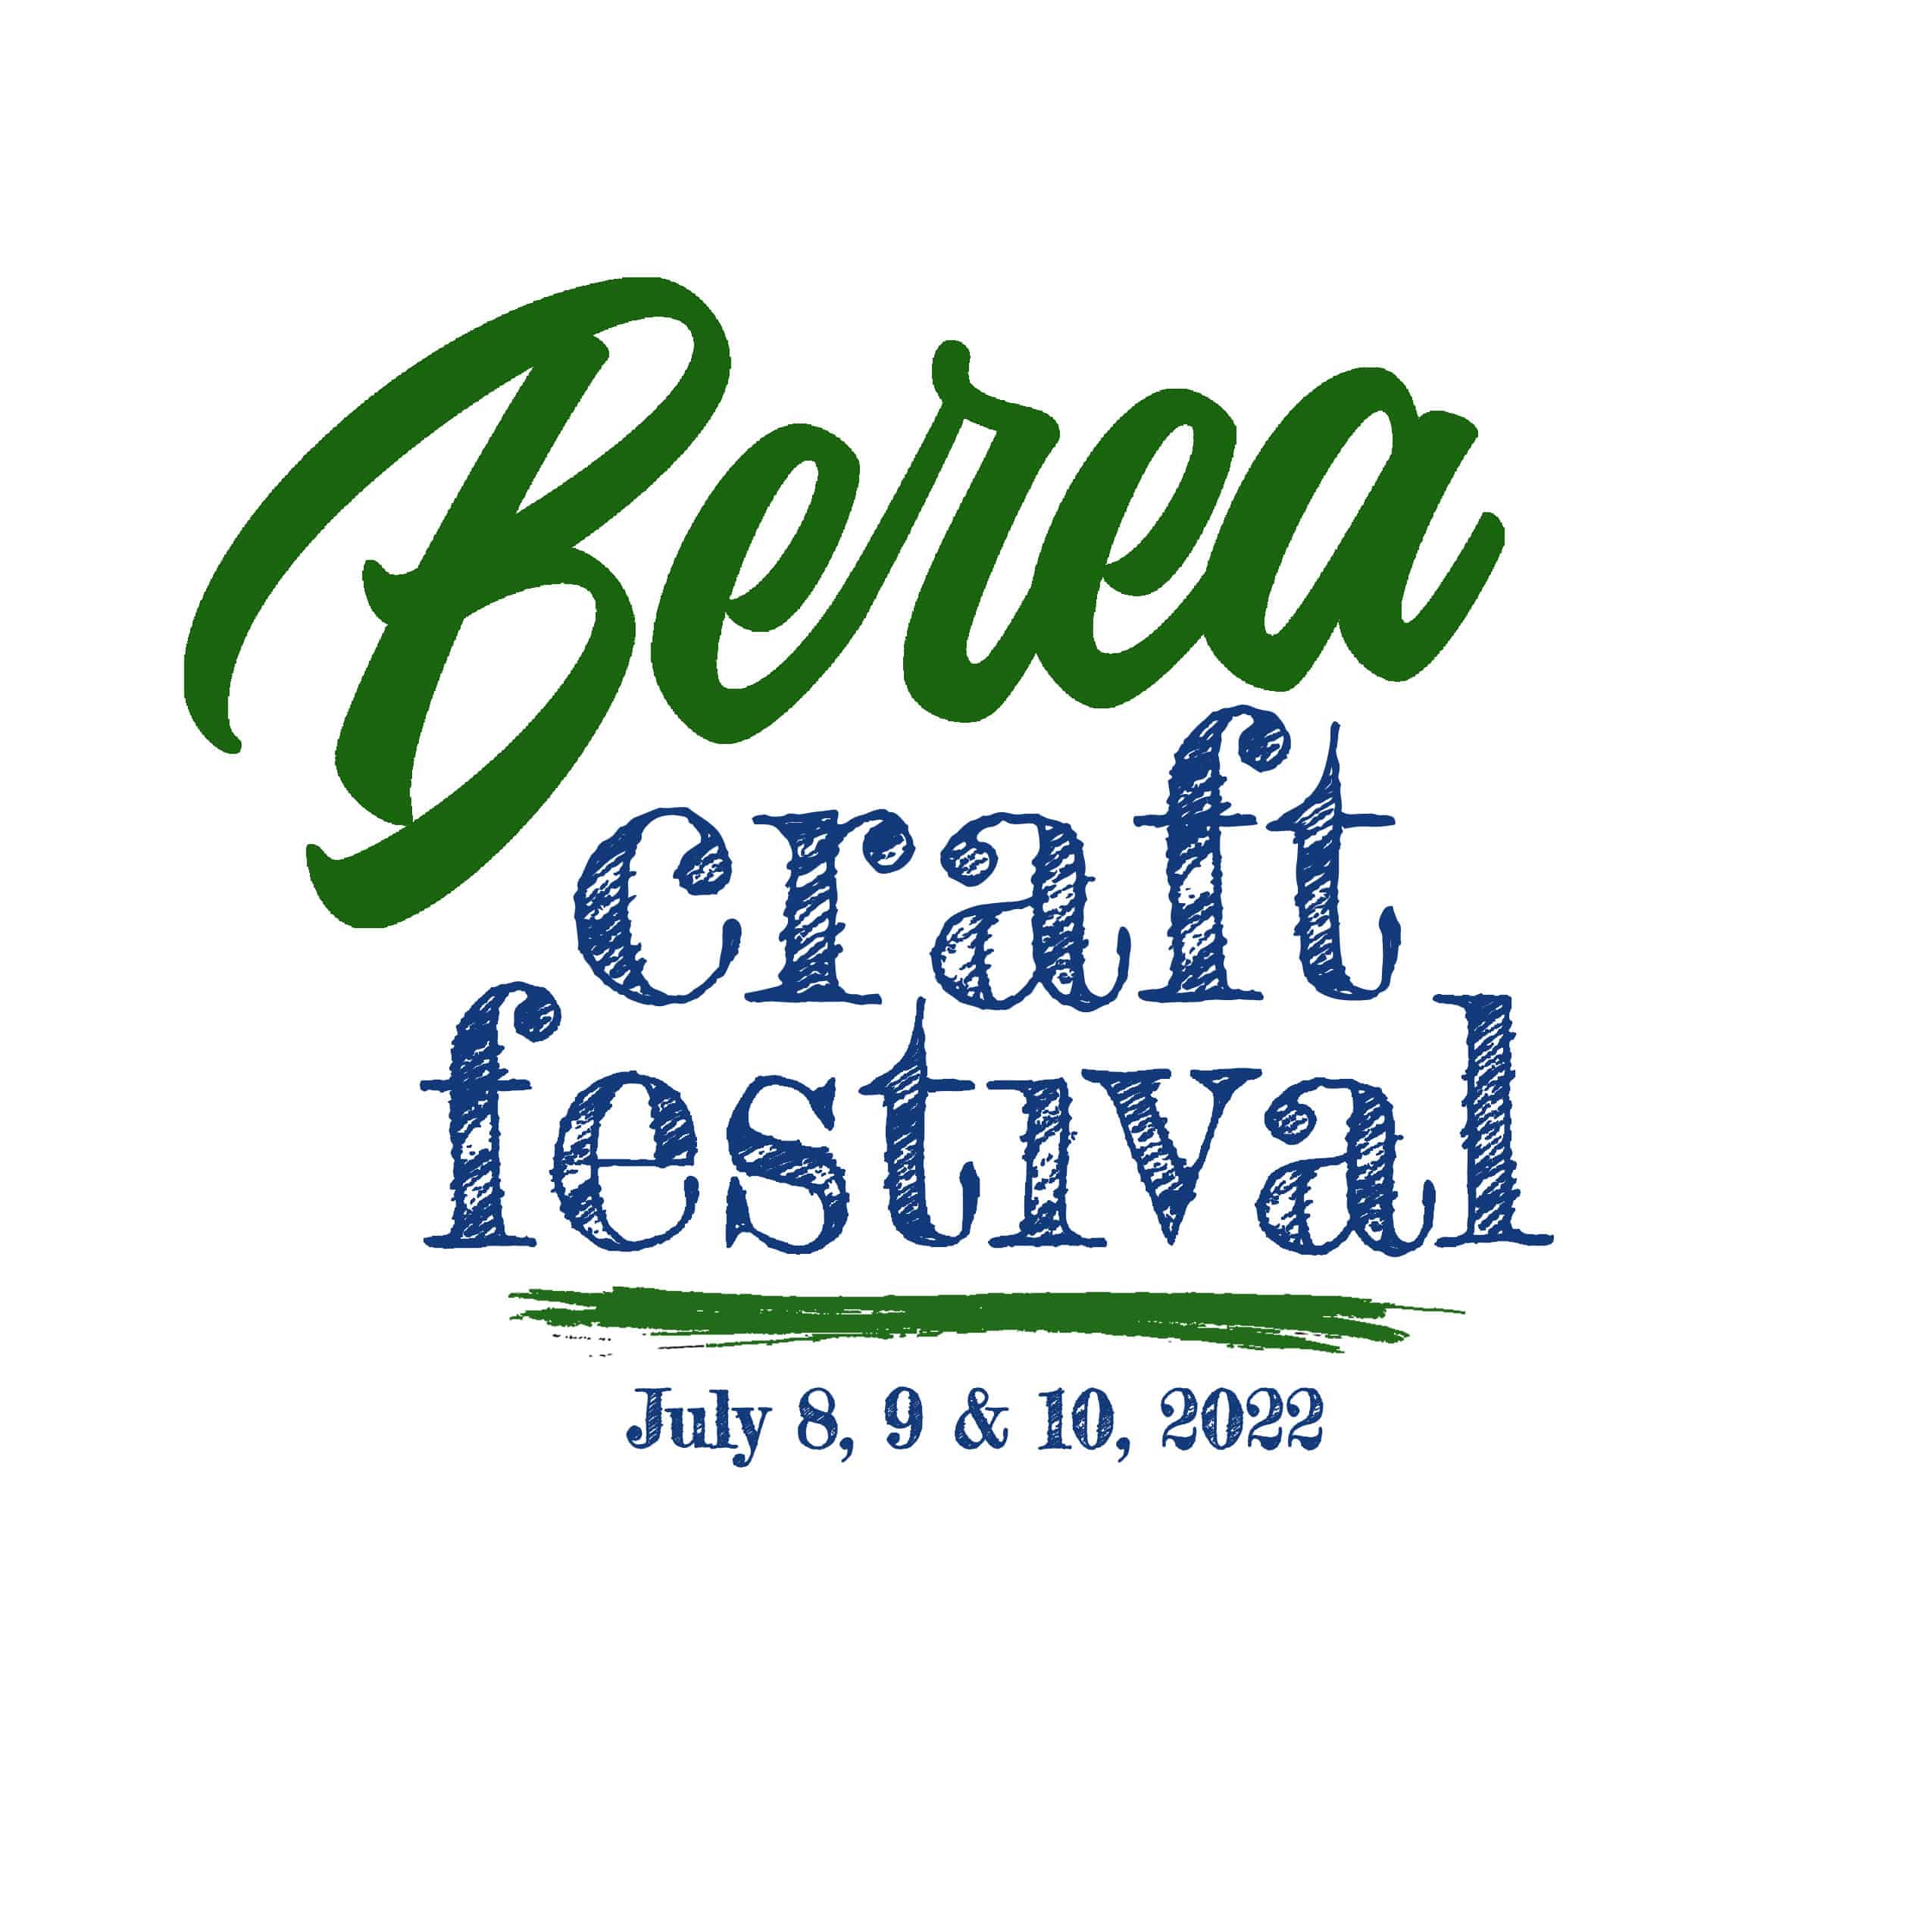 Blue and green text that says Berea Craft Festival July 8, 9 and 10, 2022